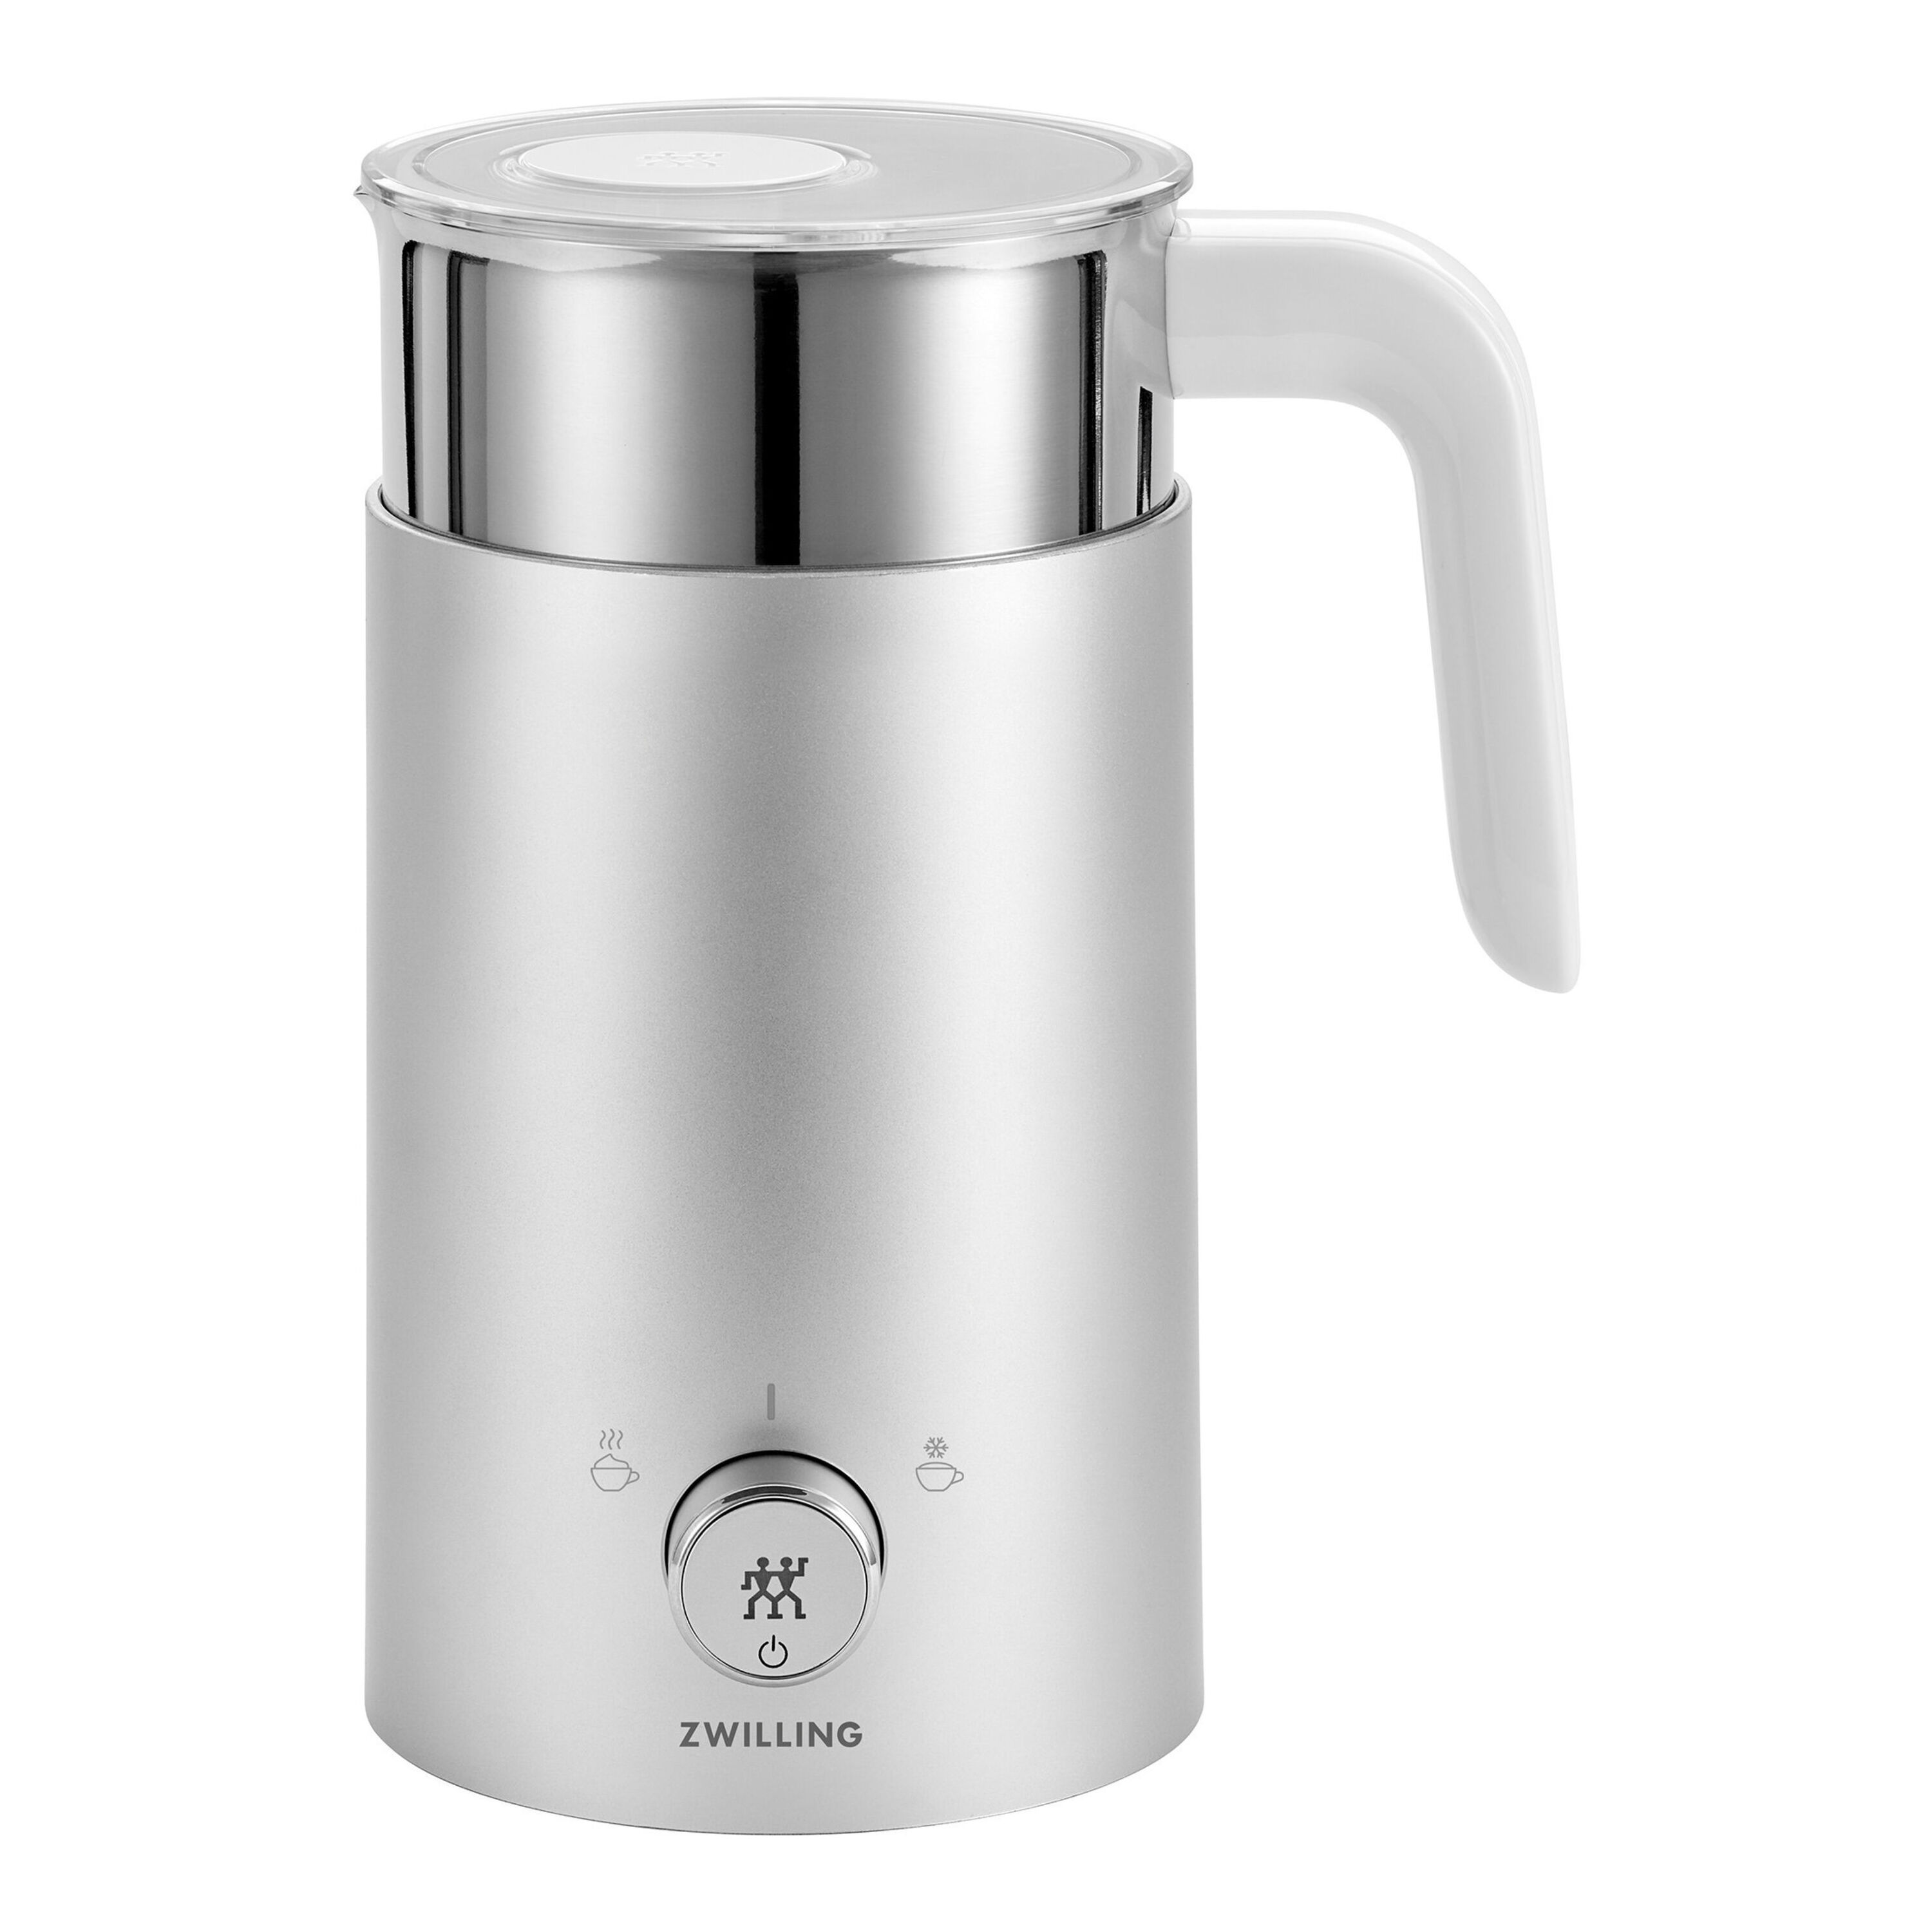 L'or Milk Frother